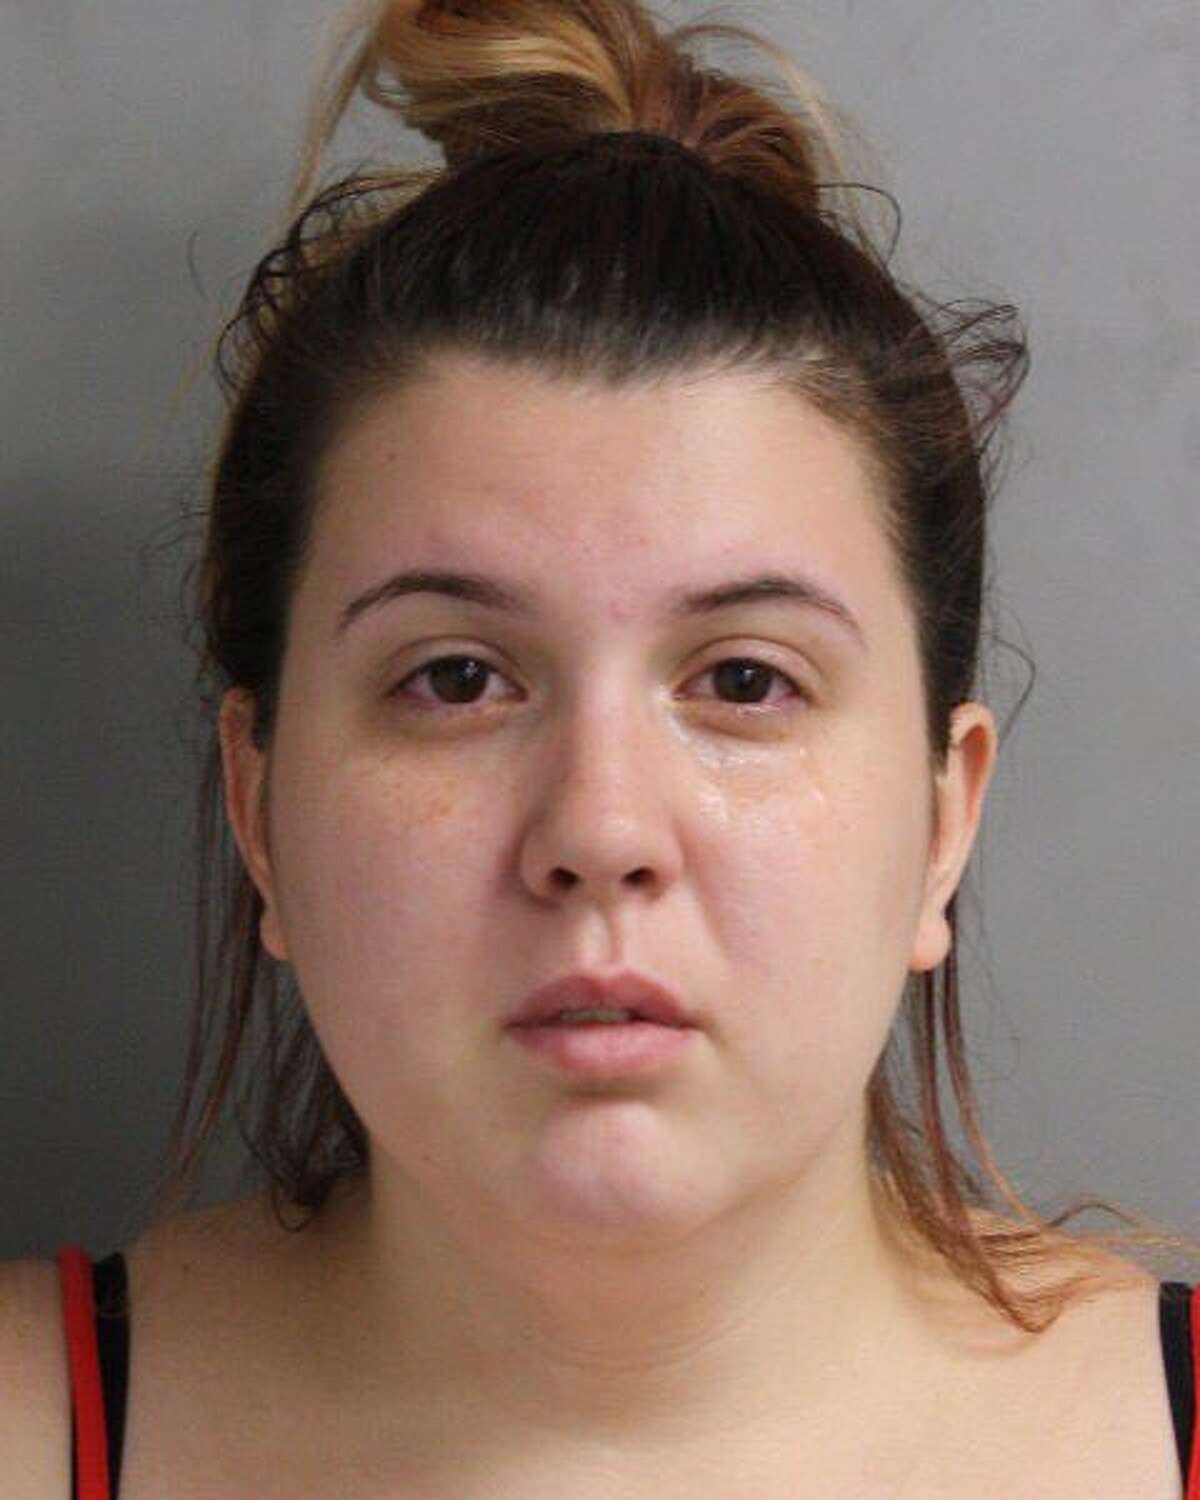 The parents of a prematurely born, 10-week-old girl have been charged in the baby's death just days after she was brought home from the hospital, Harris County District Attorney Kim Ogg announced on Monday. The mother, Katharine Wyndham White, 21, was charged with injury to a child by omission in the death of their daughter, Jazmine Robin.